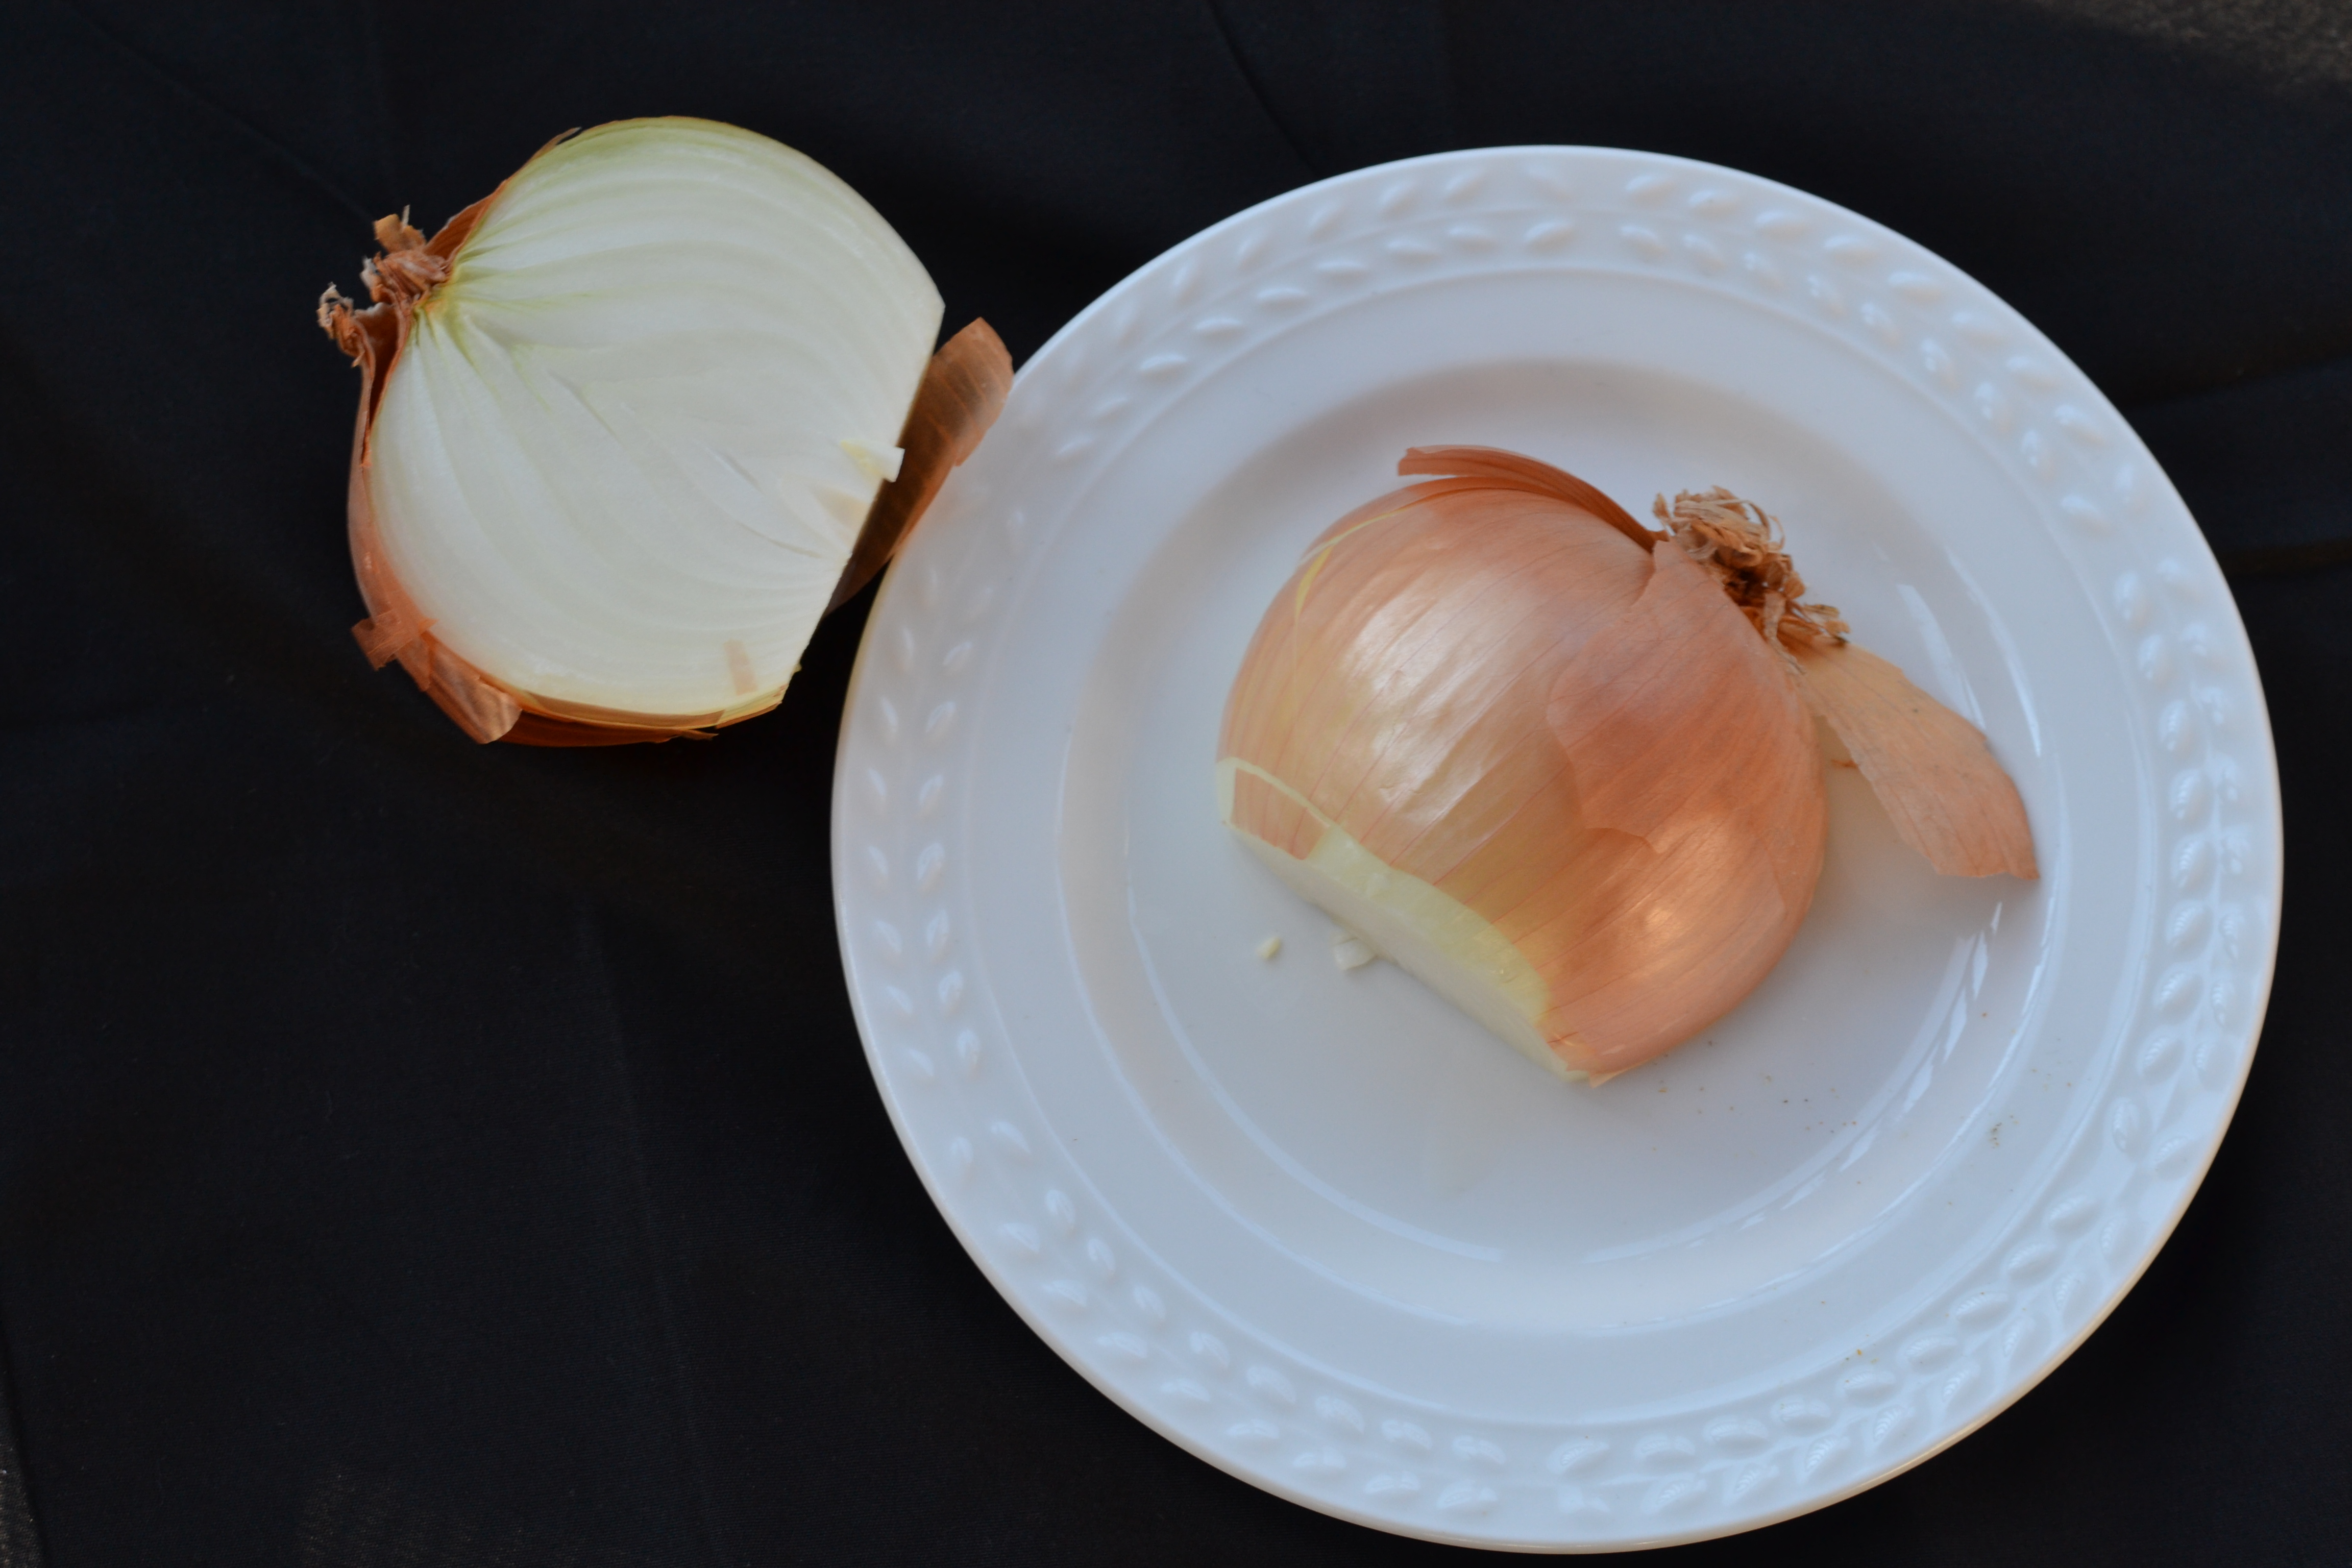 How to Use Onions to Fight Off Illness | The Easy Homestead